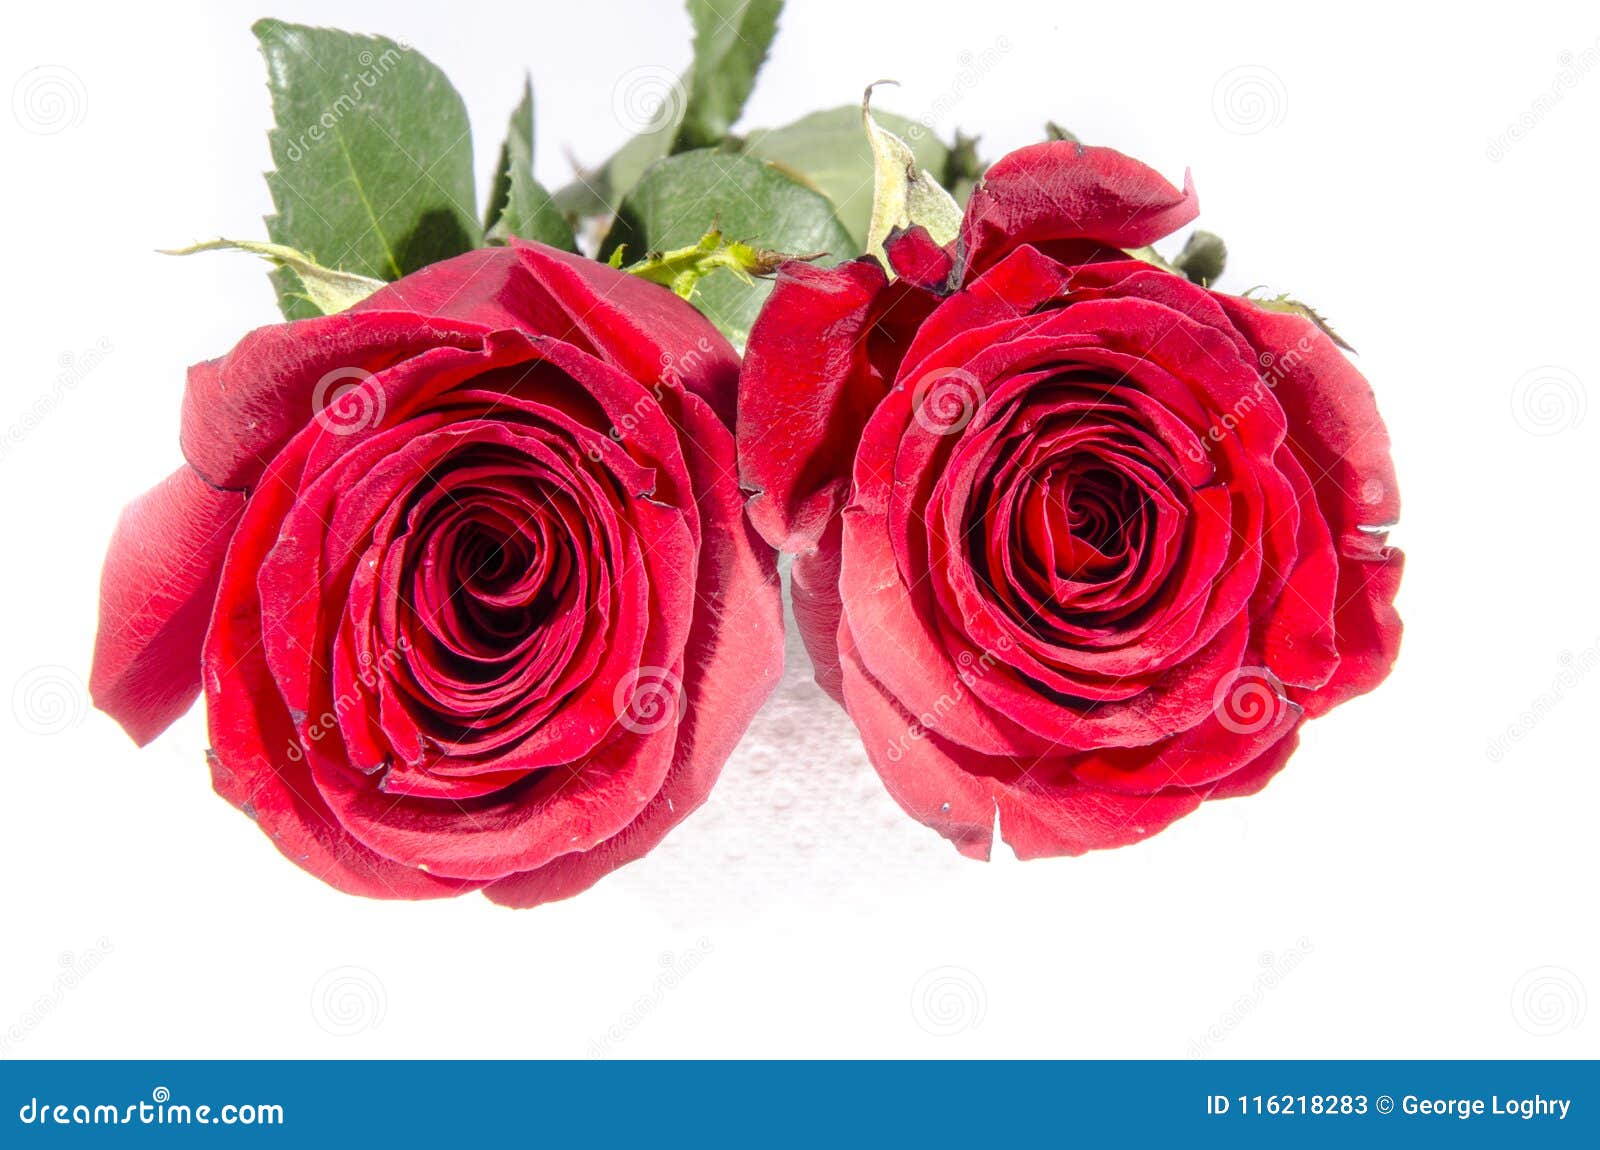 killing resident Inspirere It is the Too Red Roses Opened Up Stock Image - Image of opened, rose:  116218283